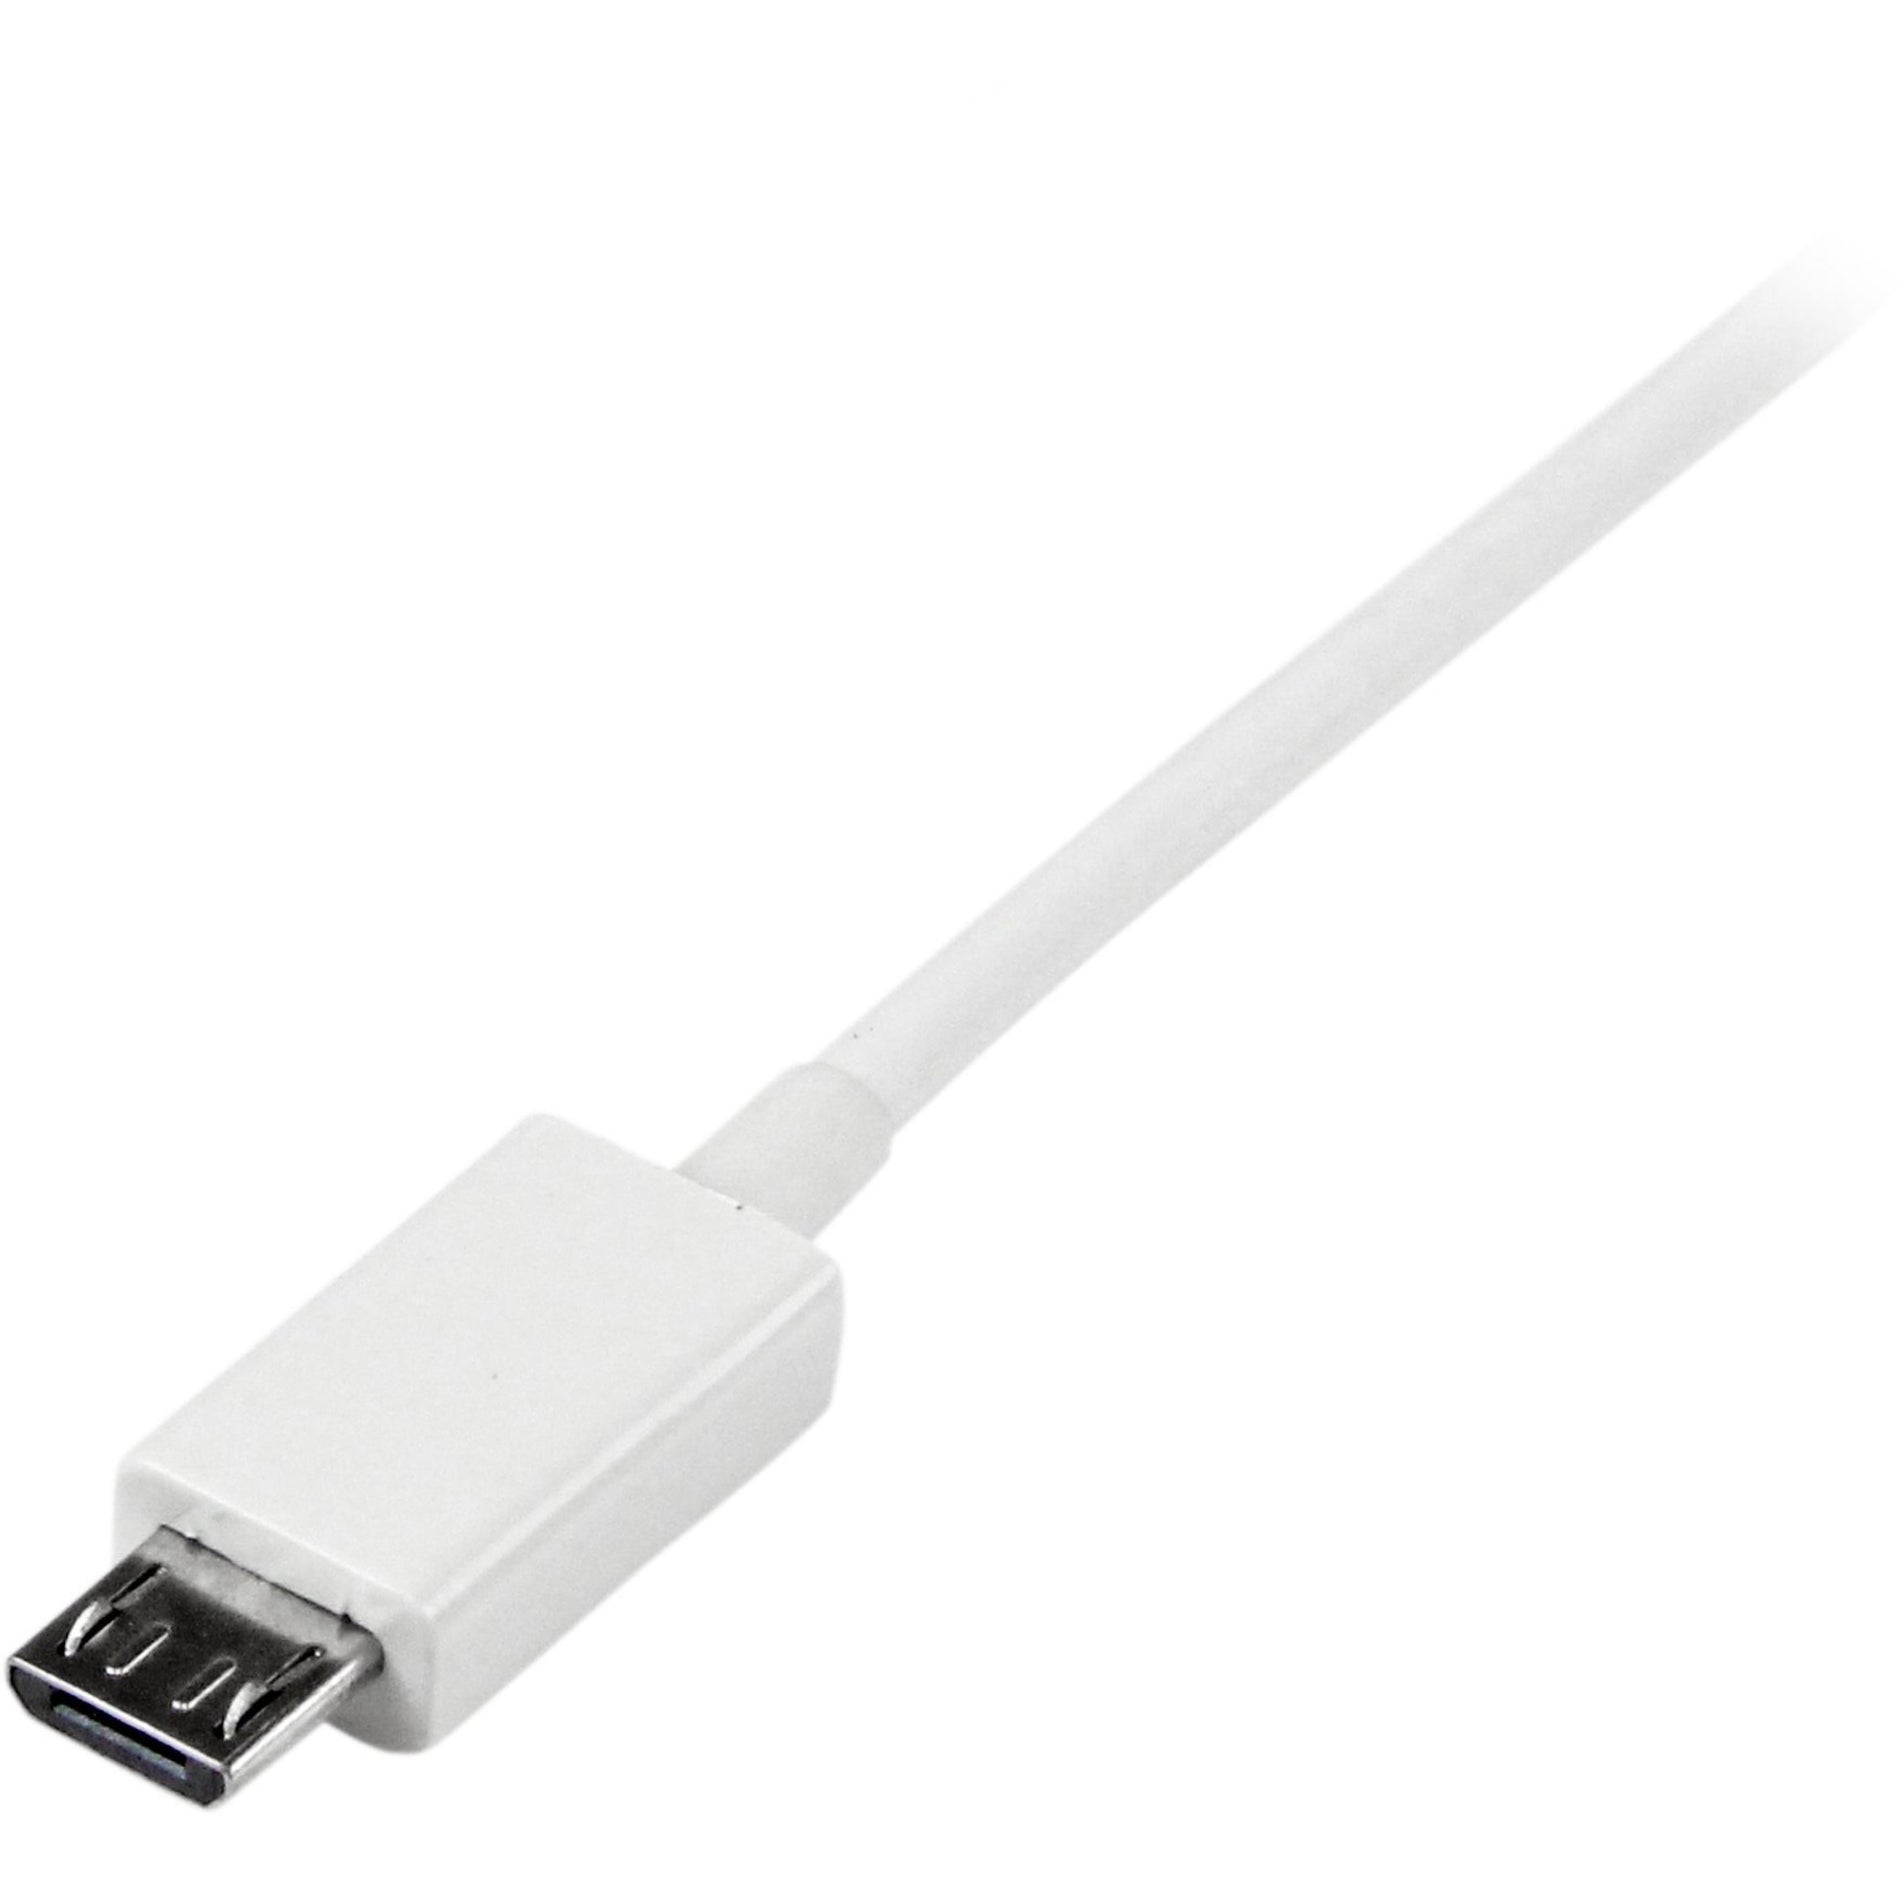 StarTech.com USBPAUB50CMW 0.5m White Micro USB Cable - A to Micro B, Molded, Strain Relief, 480 Mbit/s Data Transfer Rate